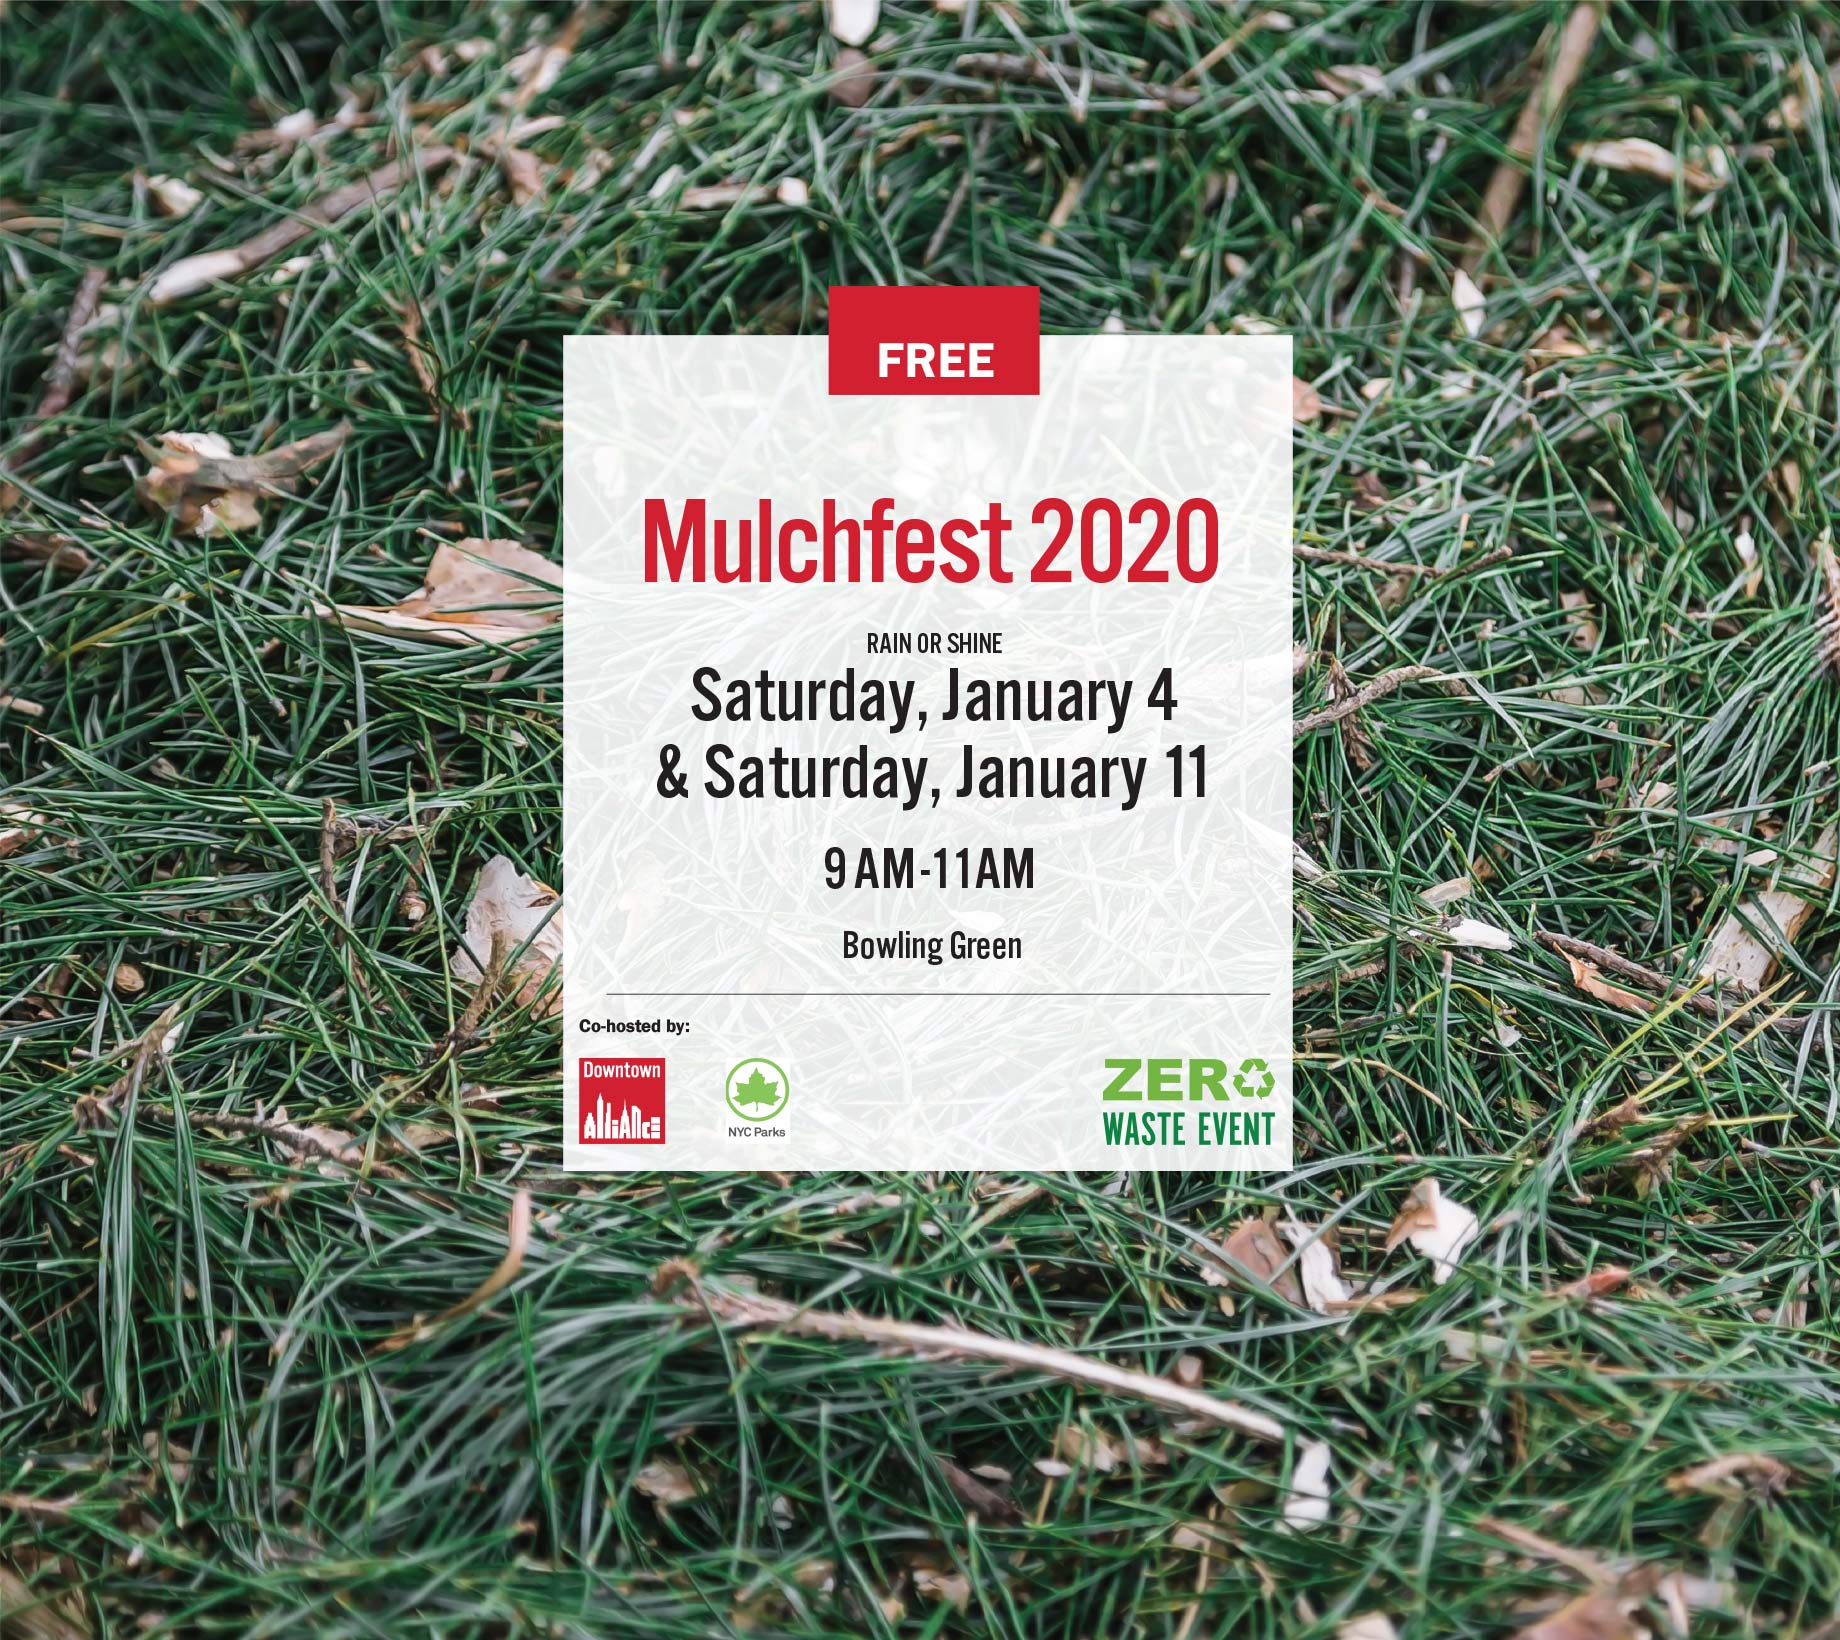 Mulchfest 2020: The Greener Way To Dispose Of Your Trees, Wreaths